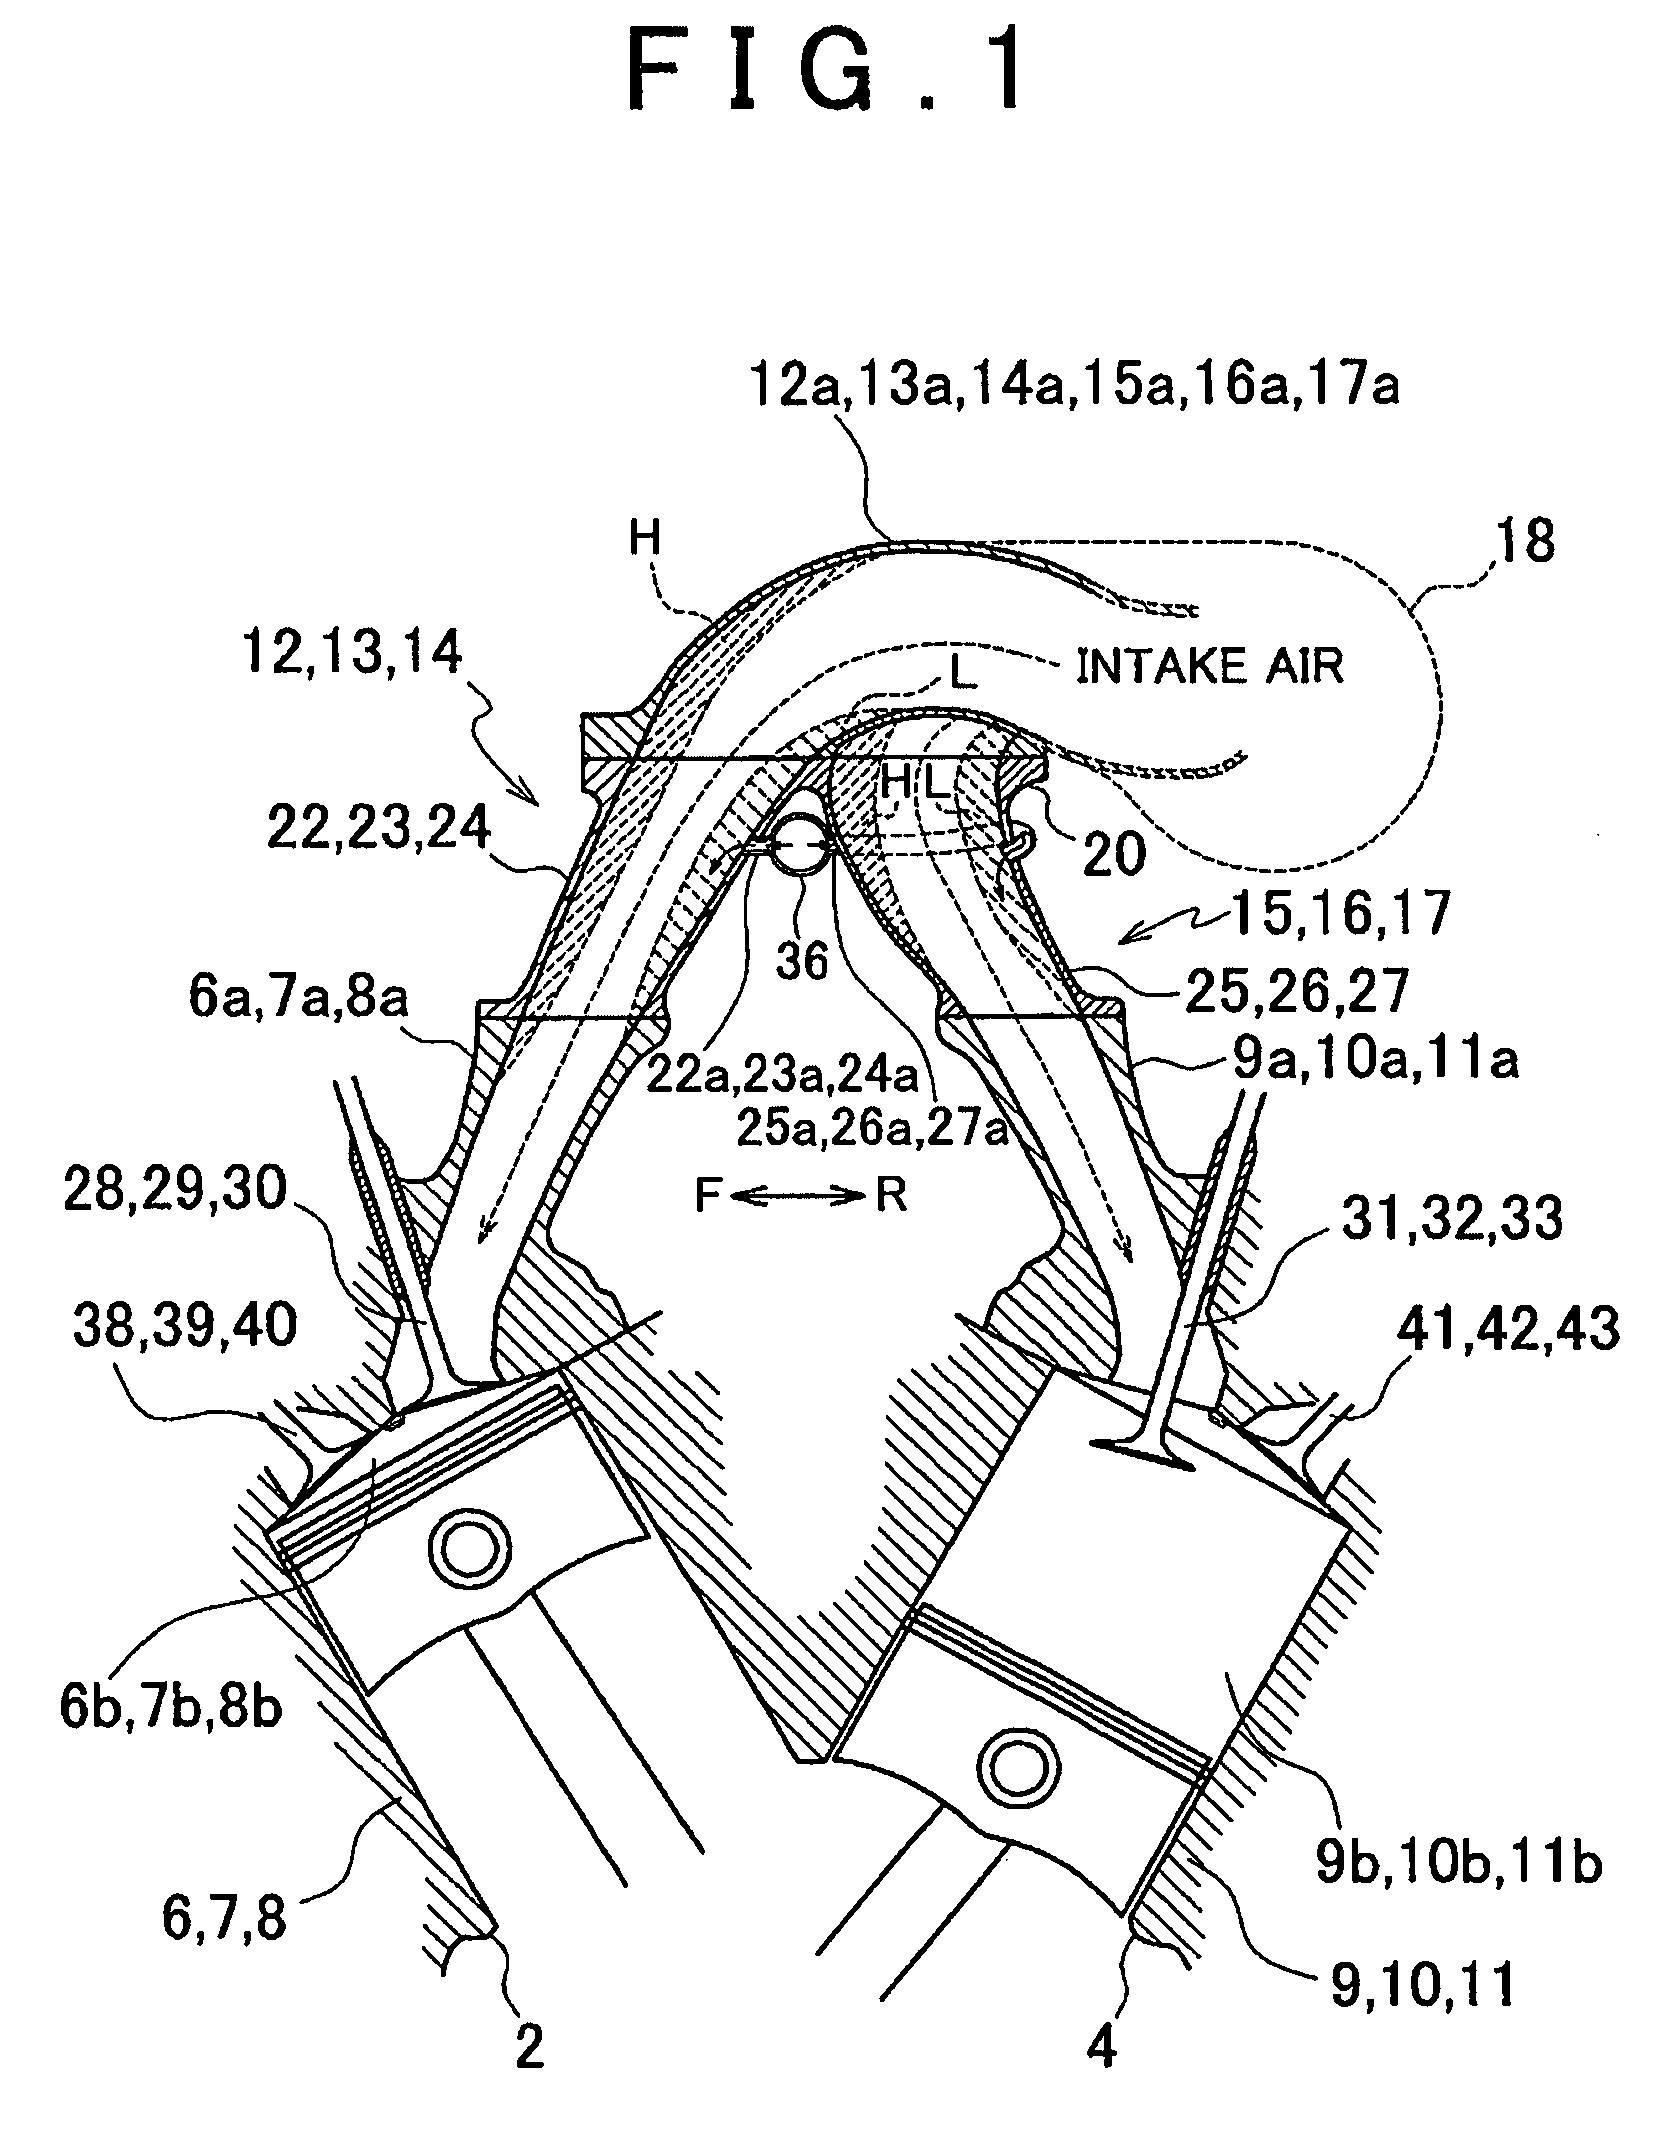 Structure for introducing gas into intake air